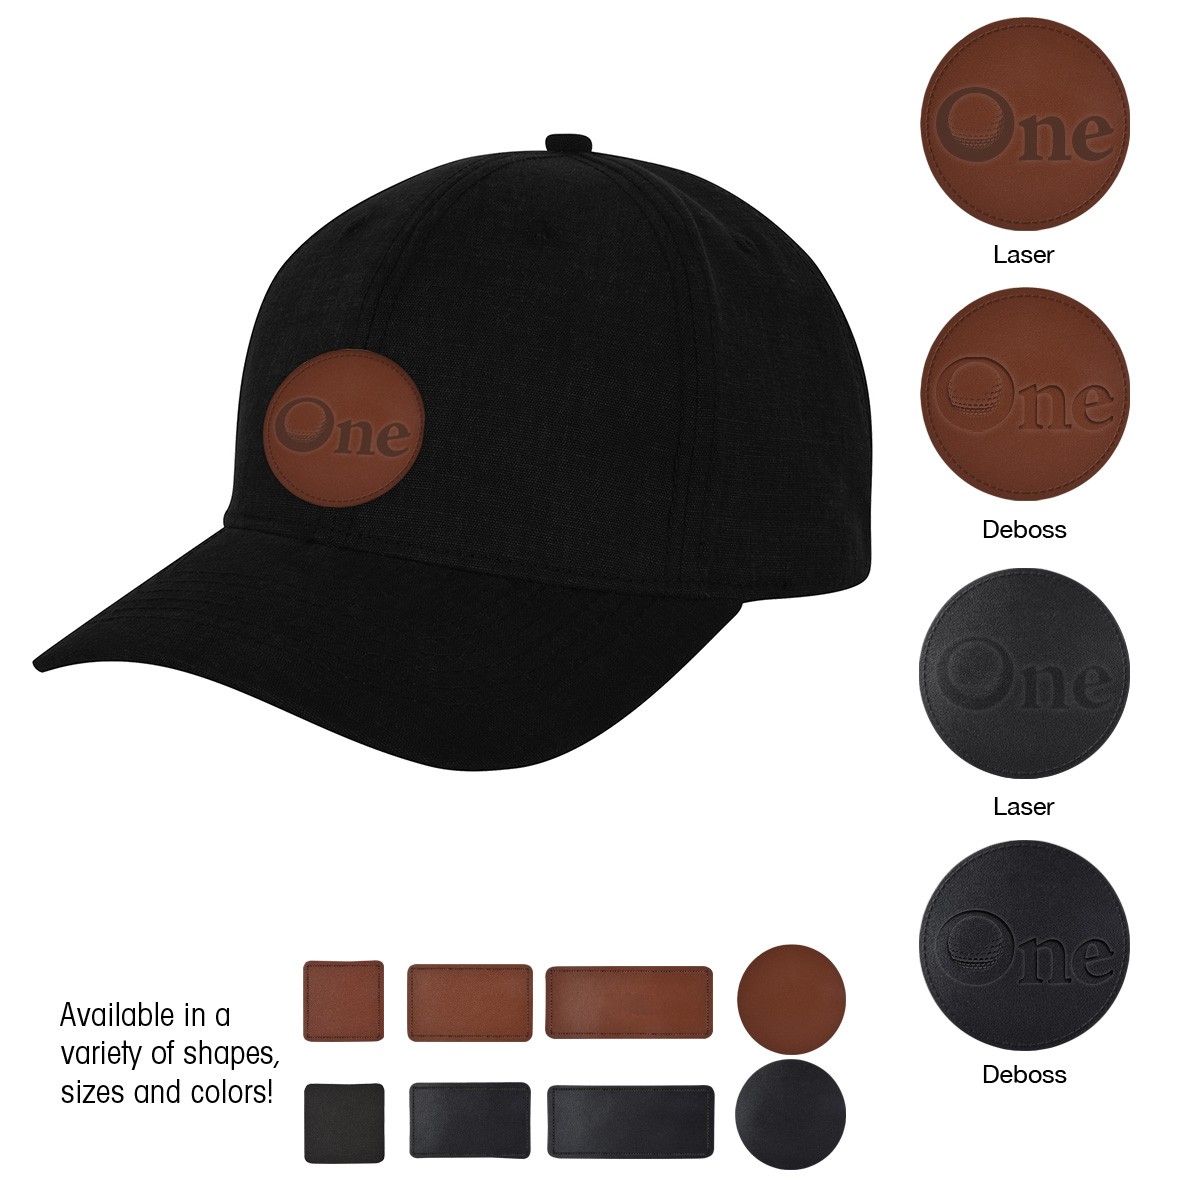 Bailey Brushed Cotton Cap